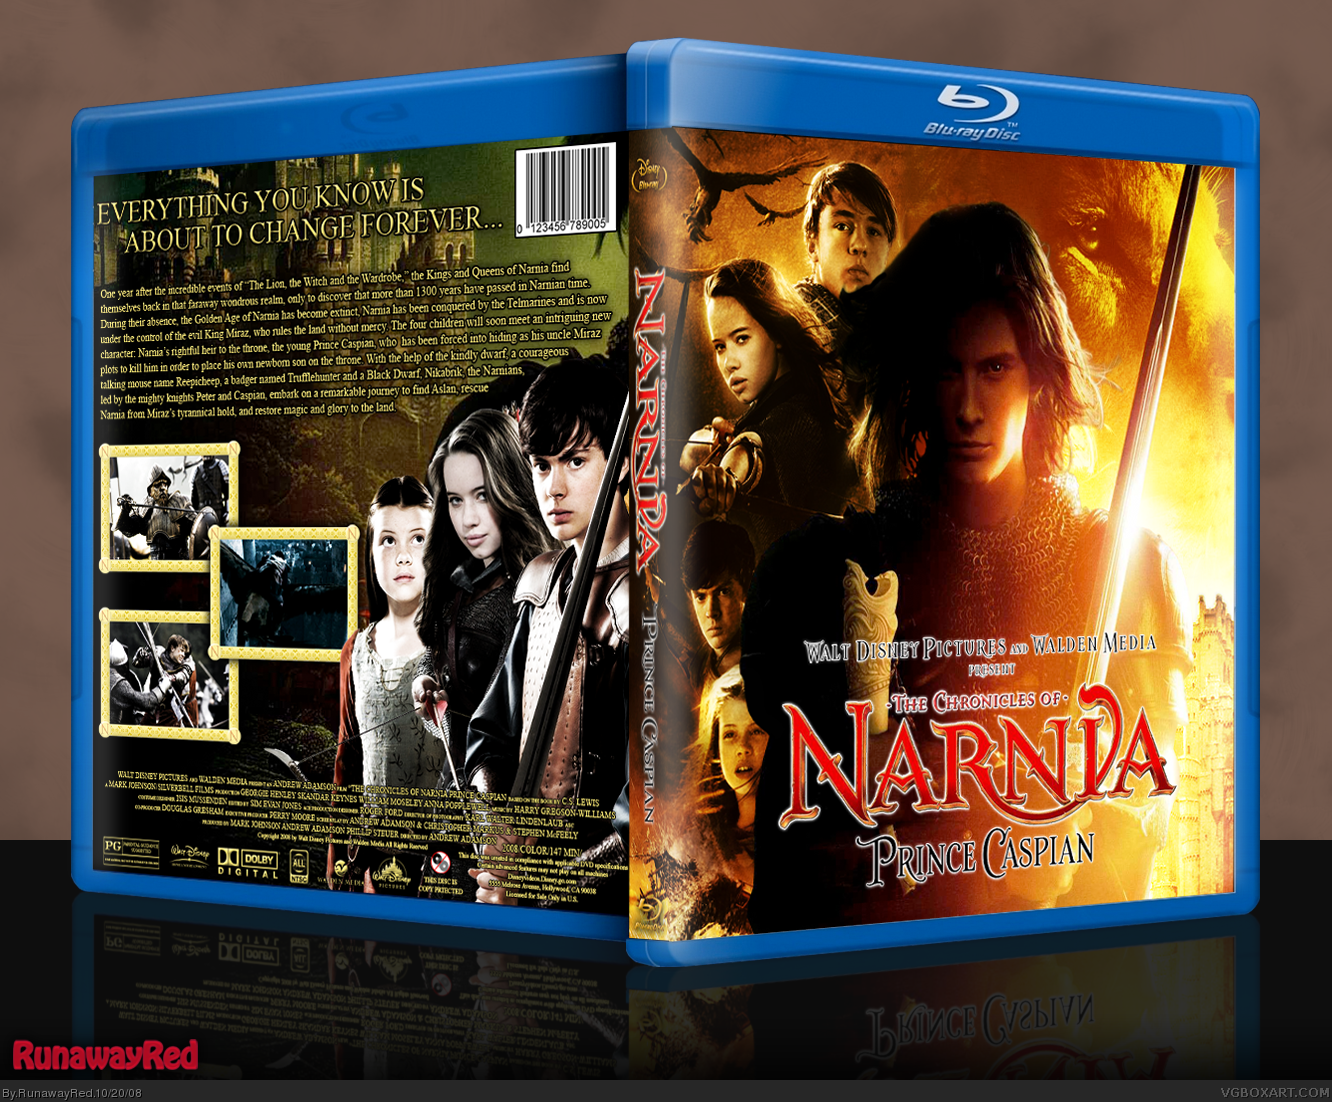 The Chronicles Of Narnia: Prince Caspian box cover